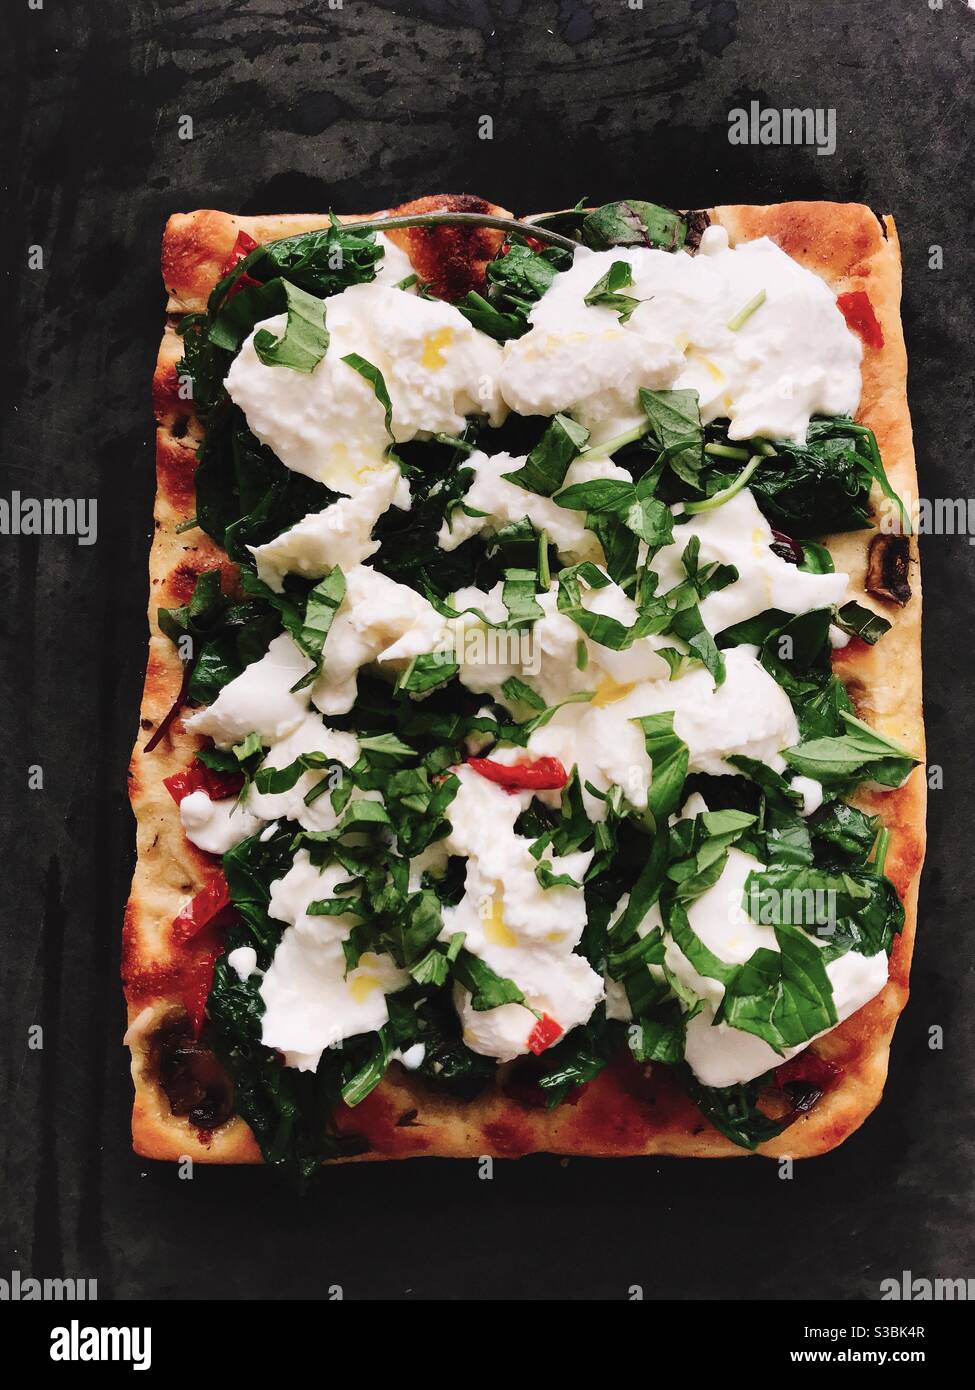 Vegetarian pizza square with mozzarella cheese and basil Stock Photo